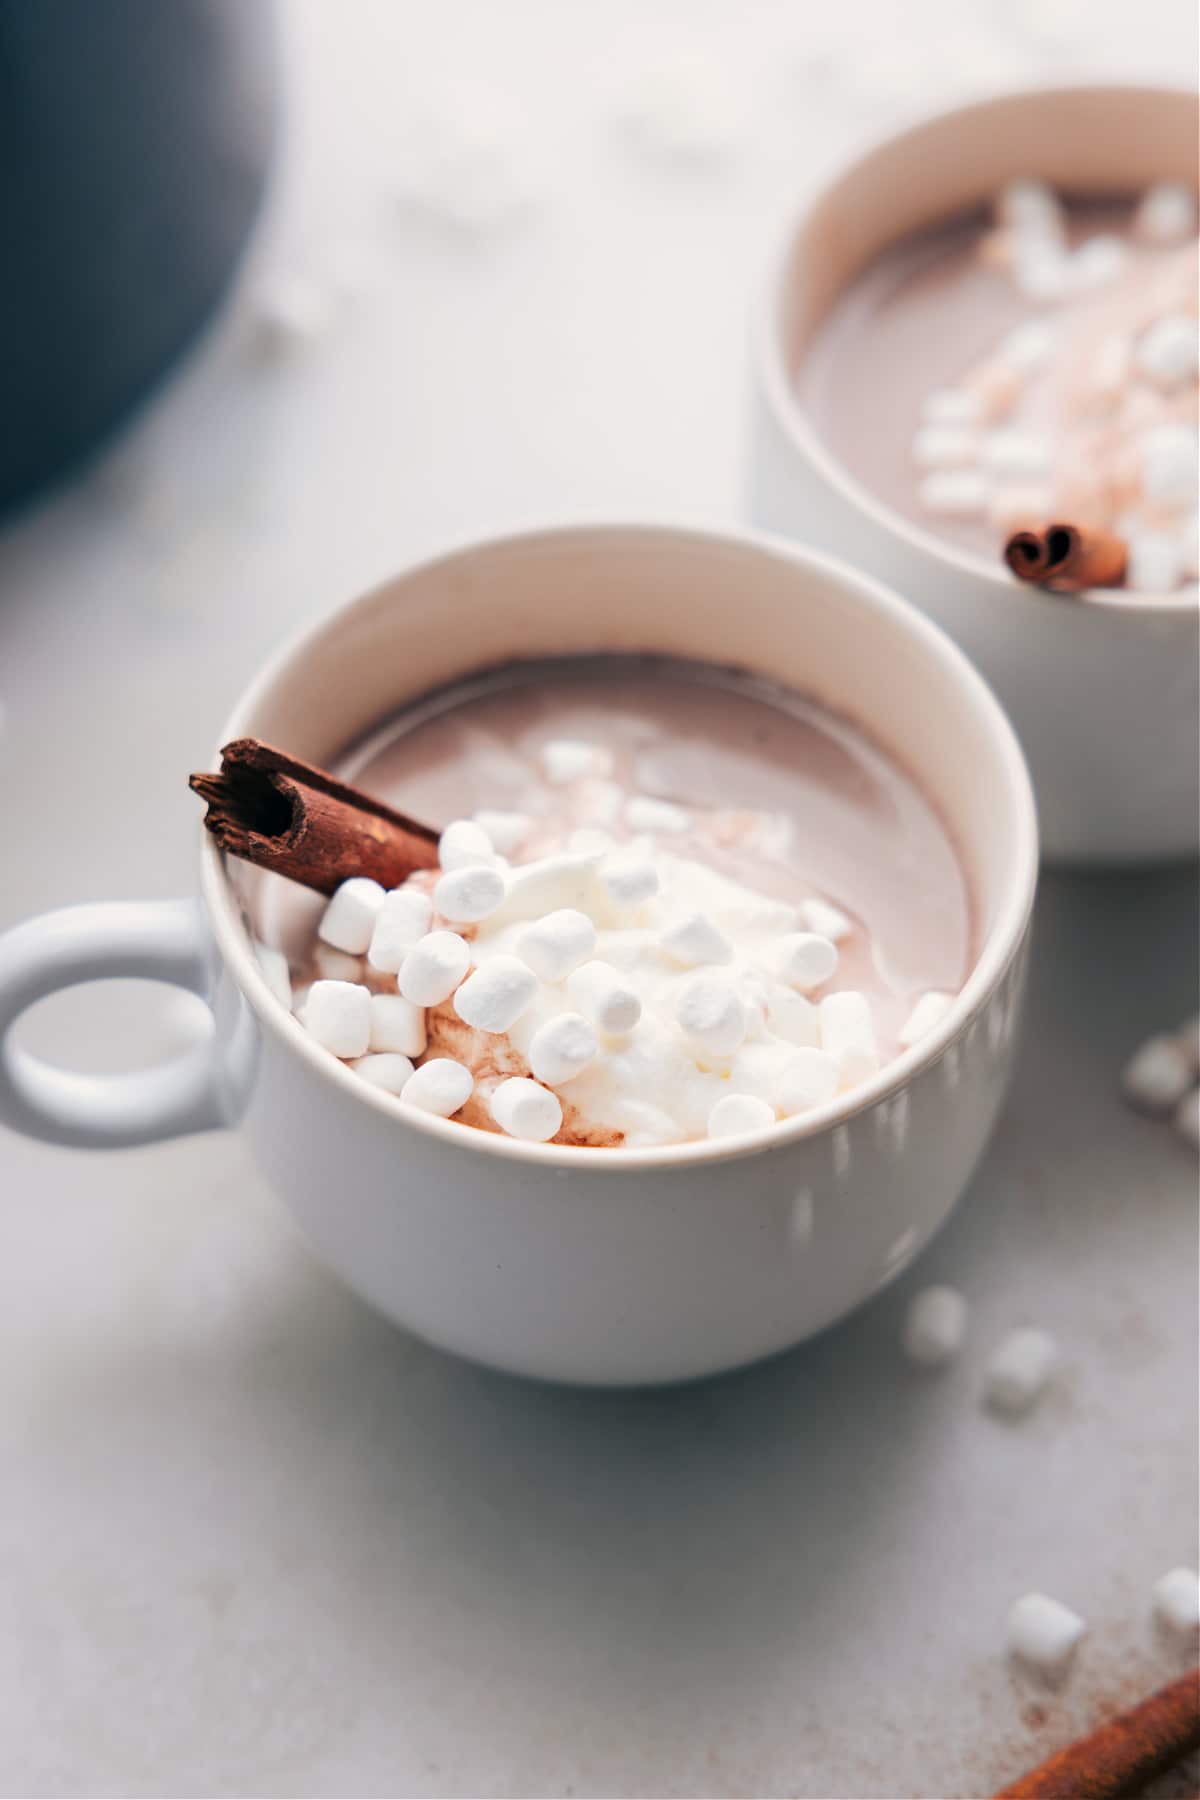 Finished steaming beverage in a mug, lavishly topped with whipped cream, marshmallows, and a cinnamon stick.